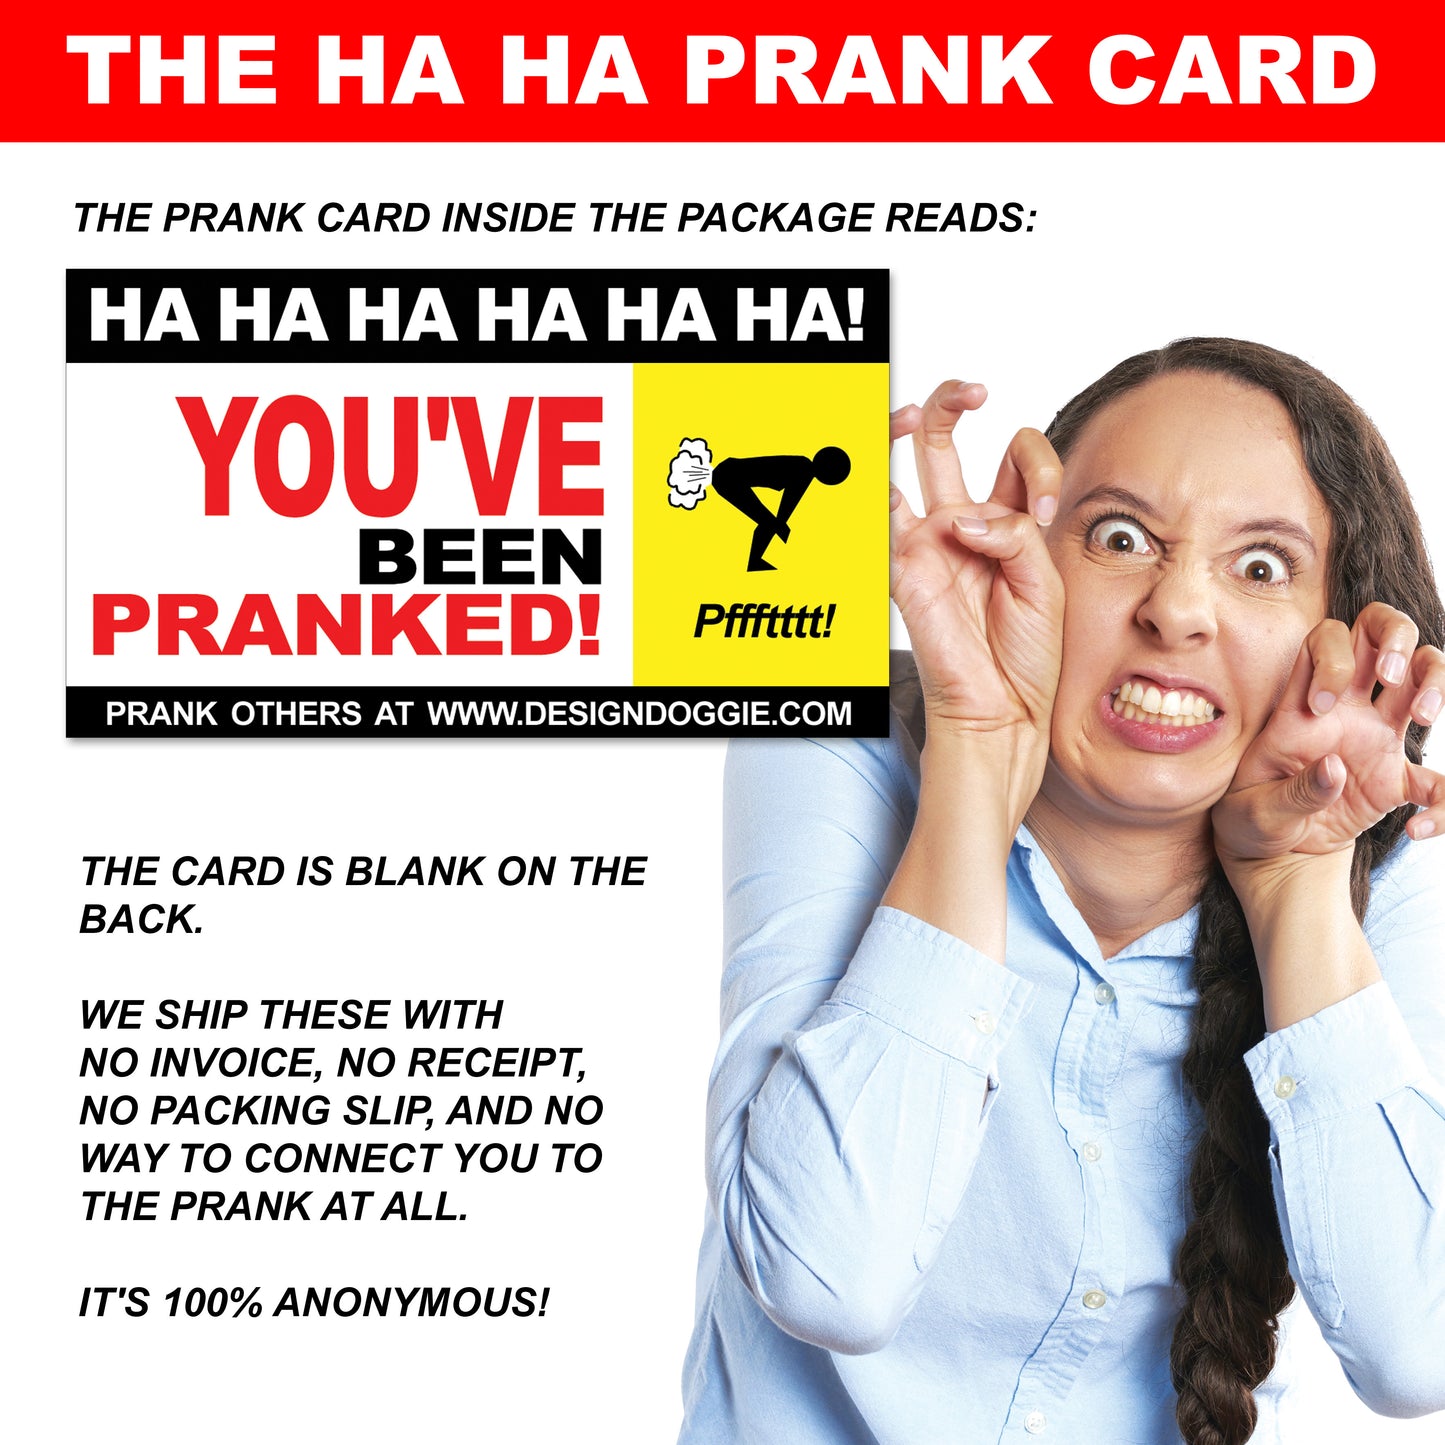 Choking the Chicken Fake DVD mail prank gets sent directly to your victims 100% anonymously!